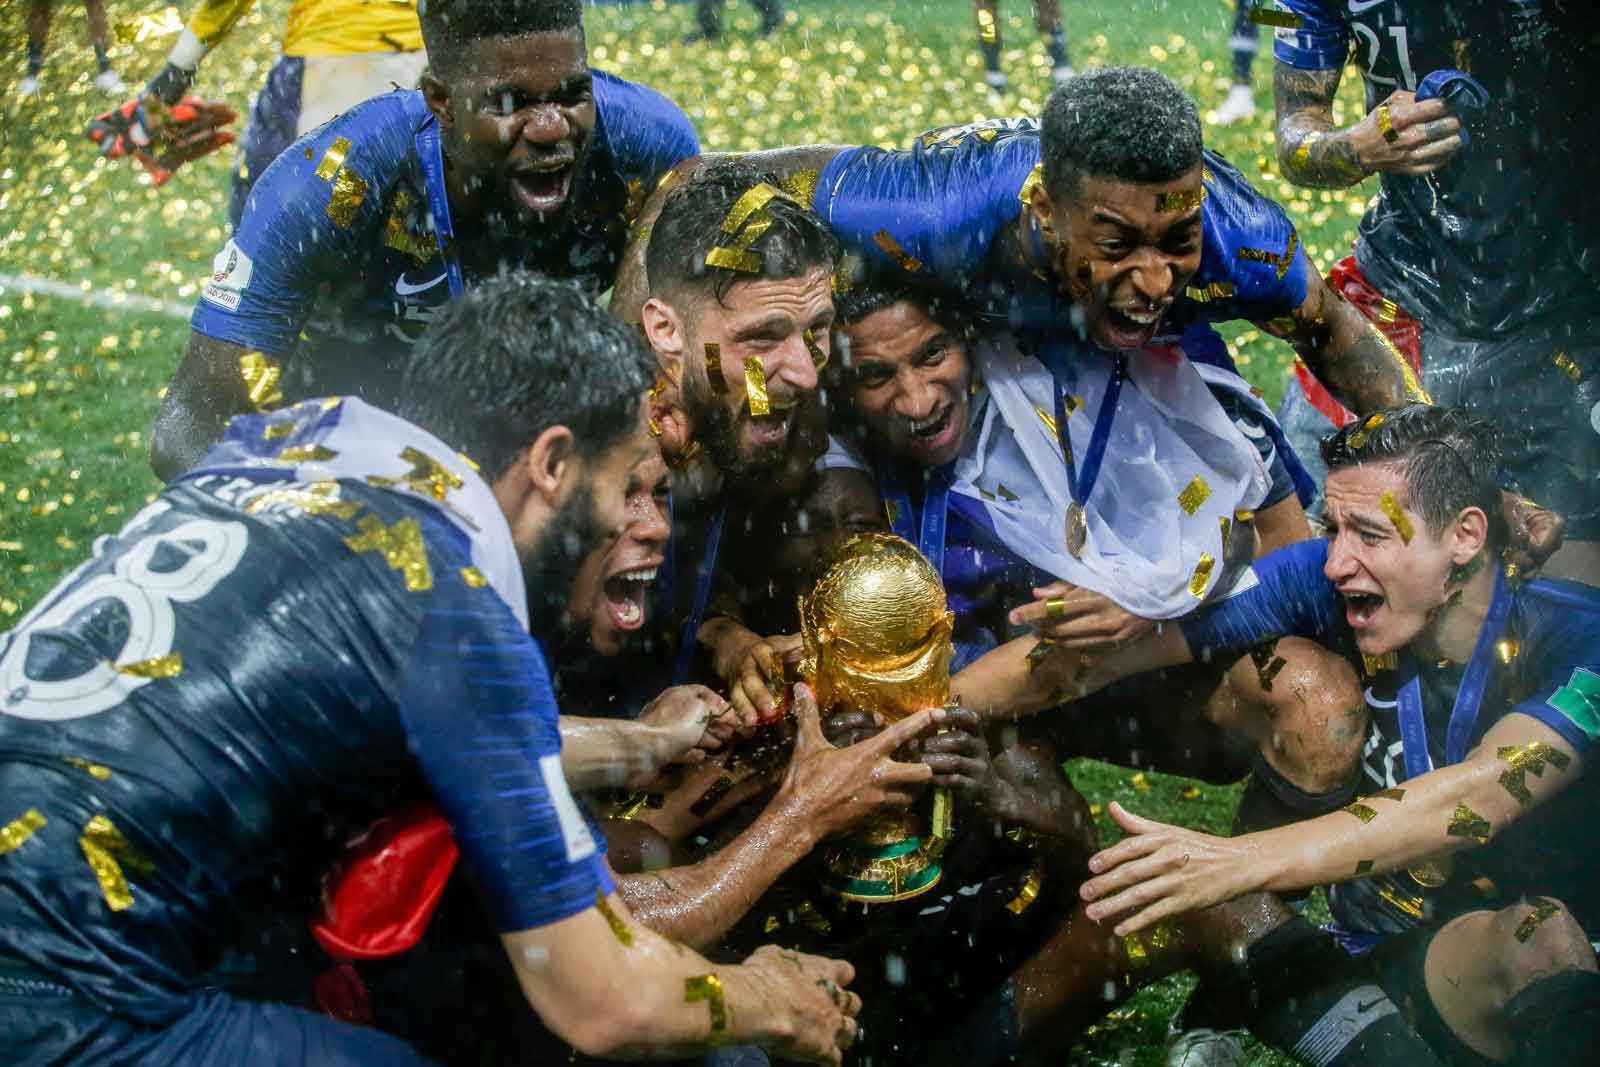 When leagues are stopping for 2022 World Cup: How schedules for